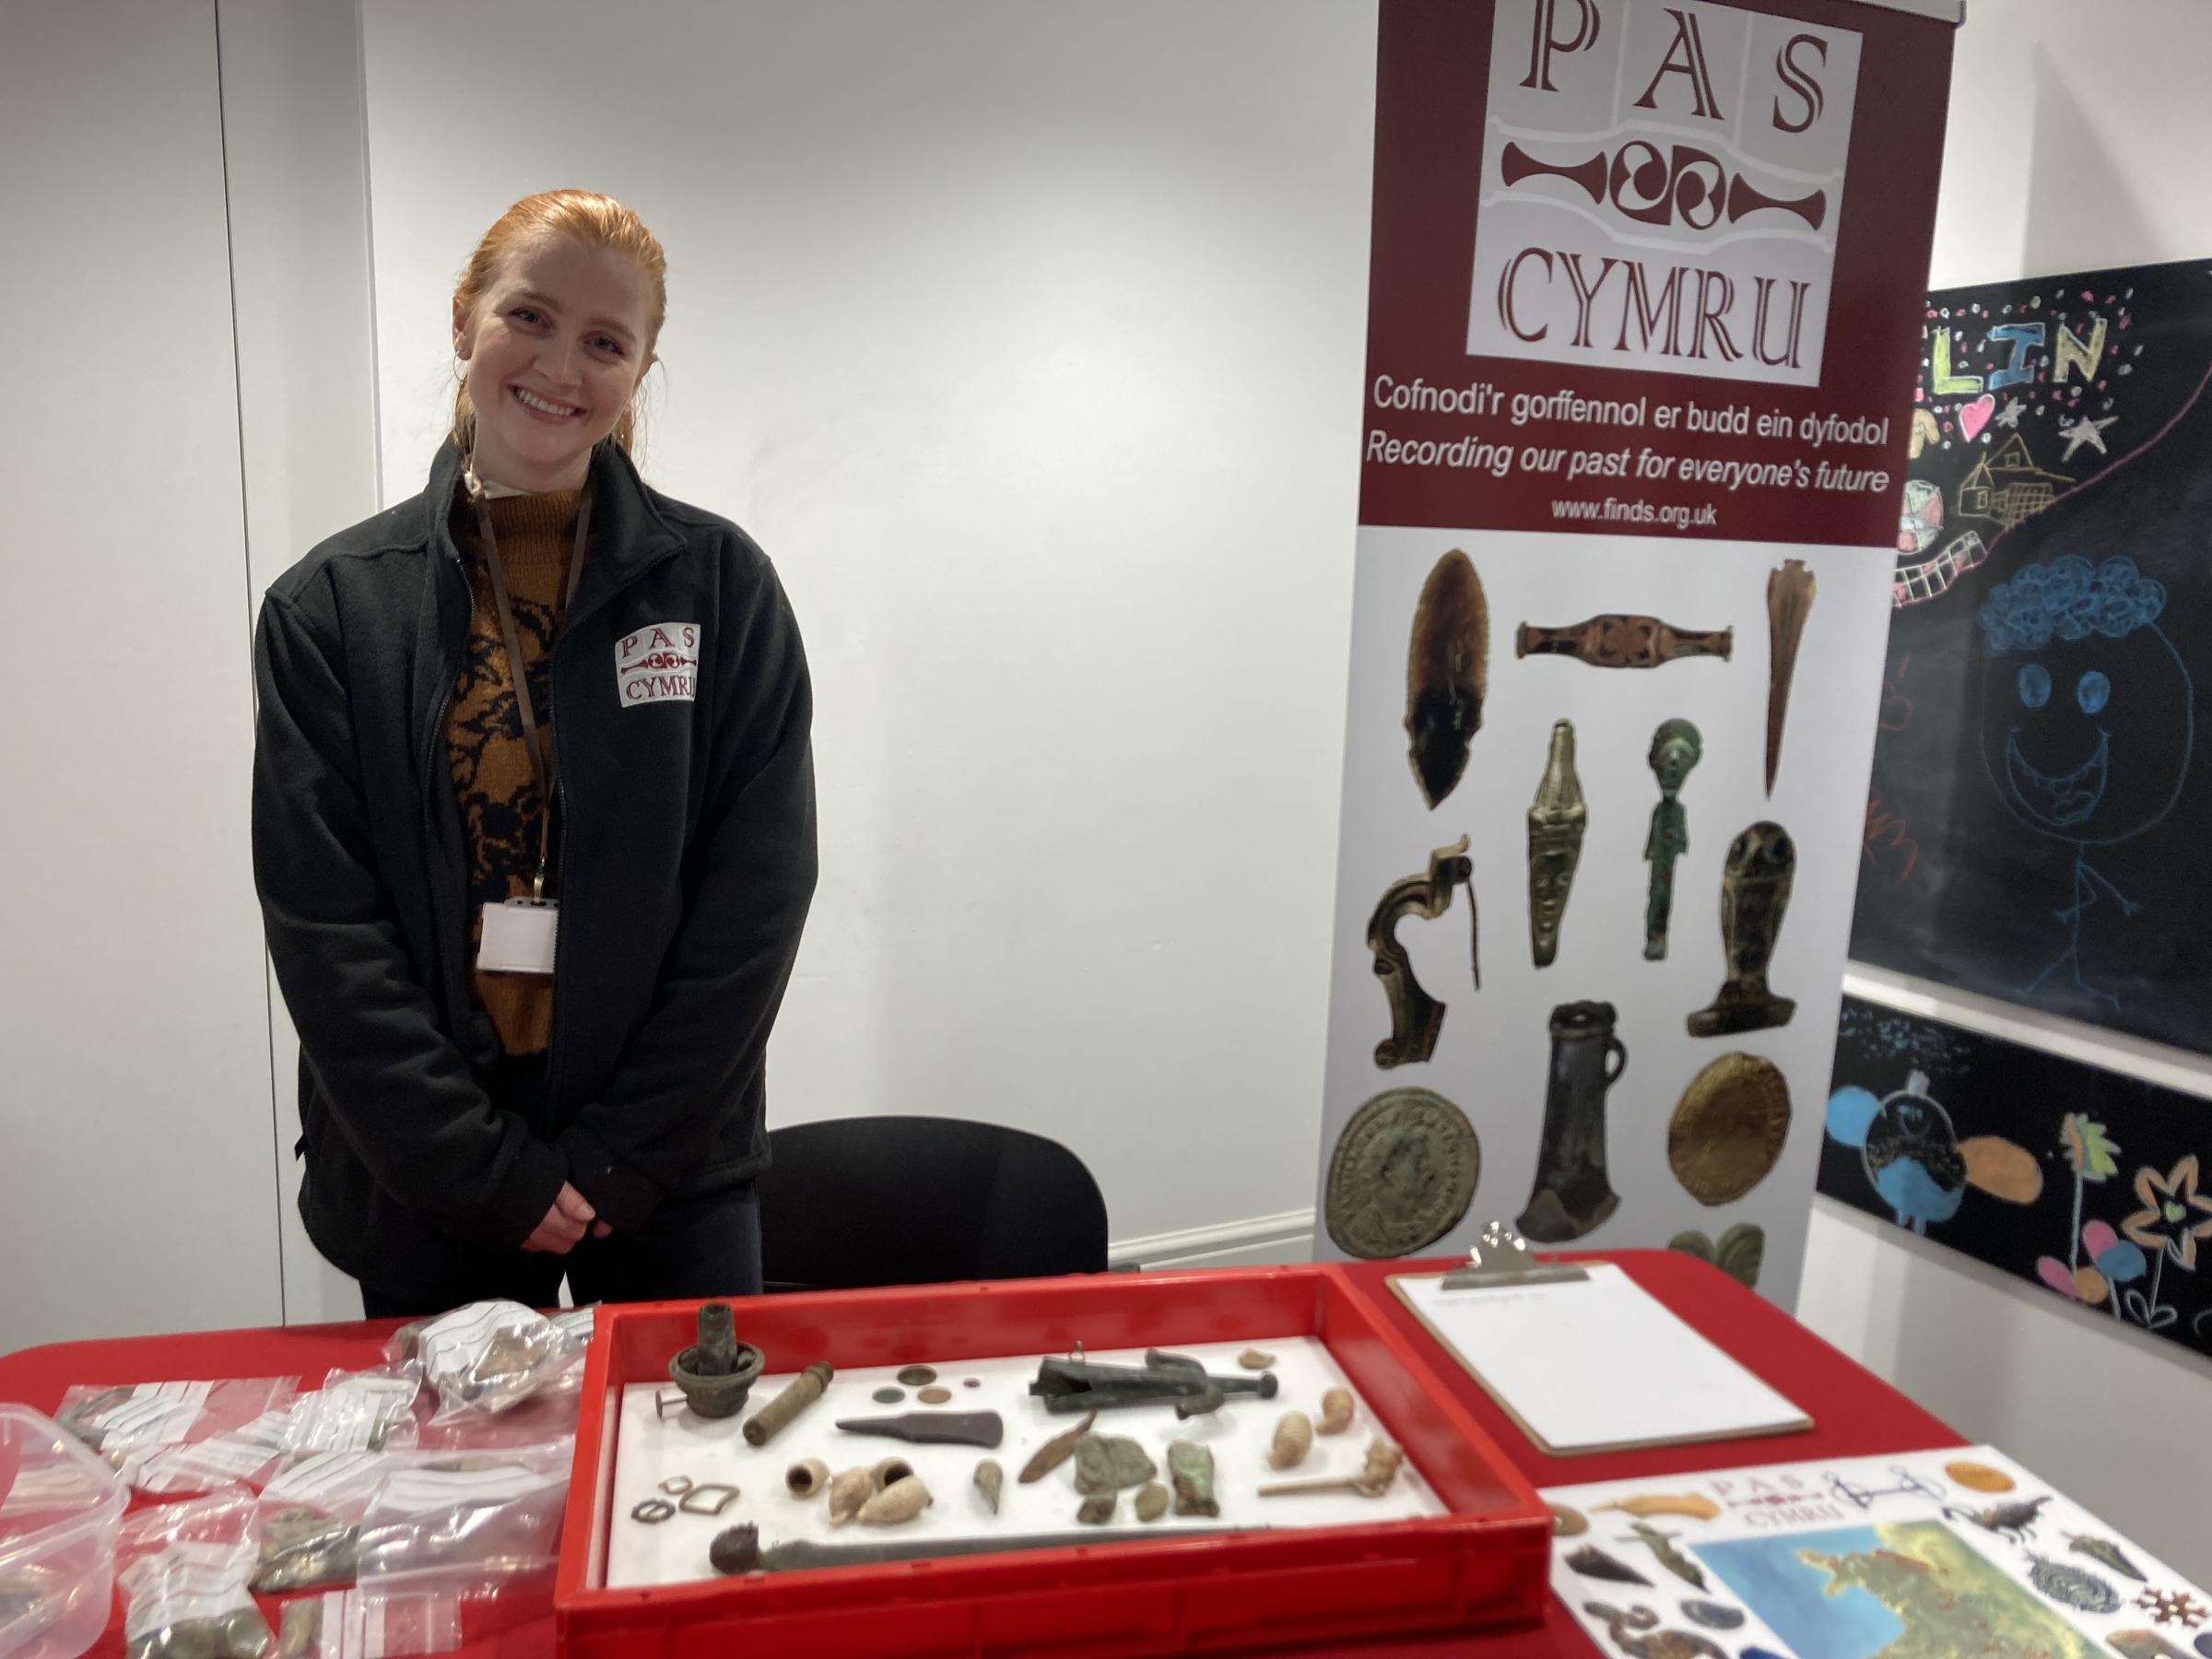 Adelle Bricking from Pas Cymru was on hand to describe the finds to the public during the popular PAS Cymru event at Storiel Bangor. Image Dale Spridgeon